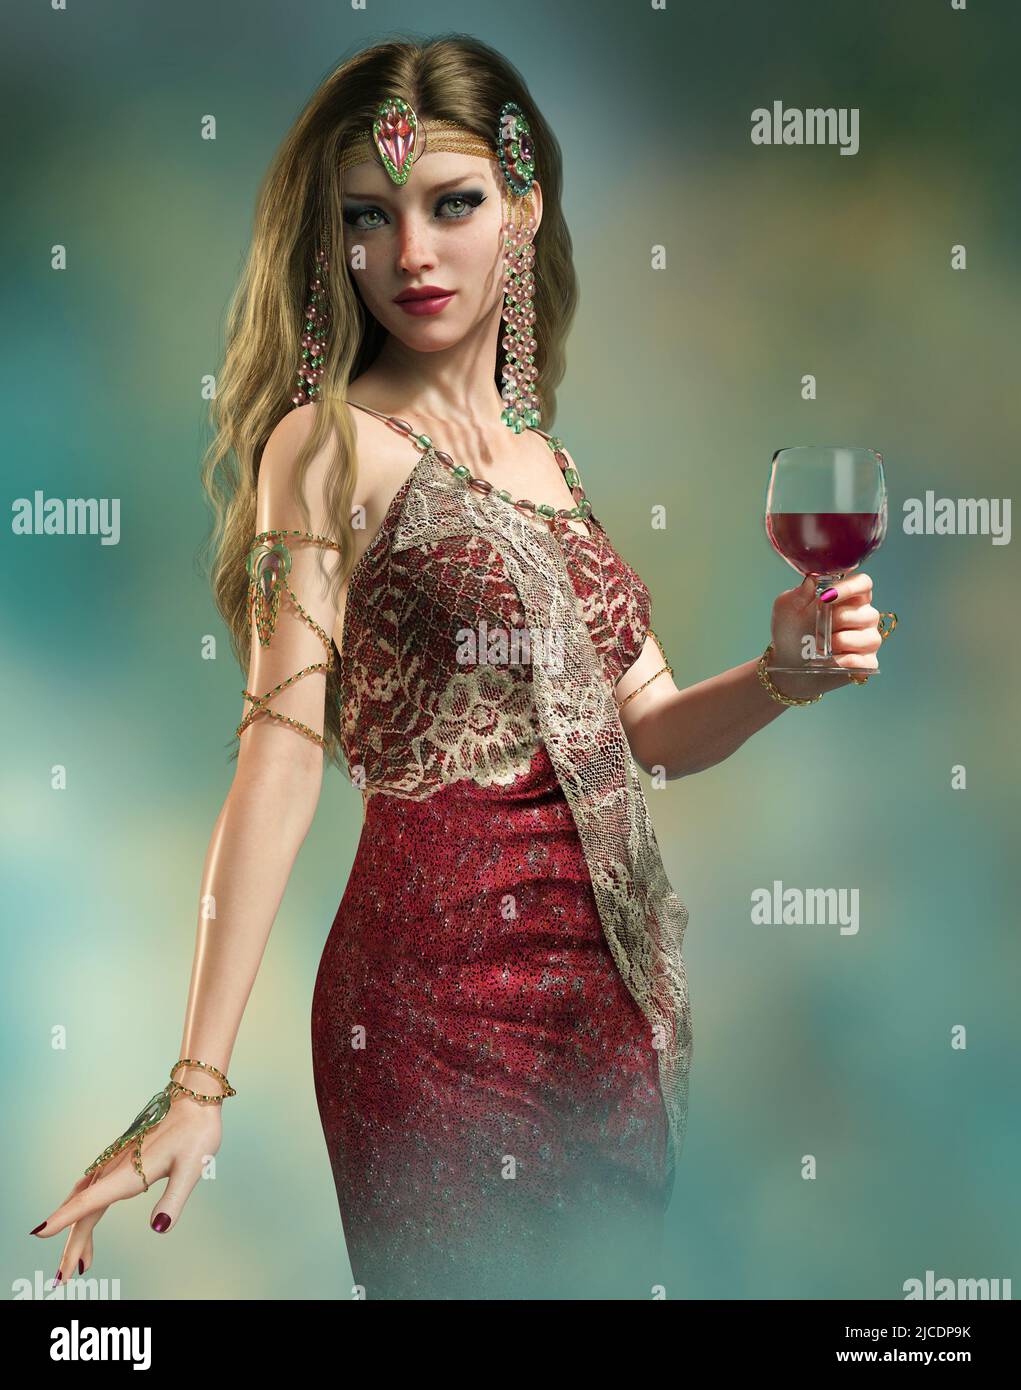 3d computer graphics of a lady in evening dress and a glass of red wine Stock Photo